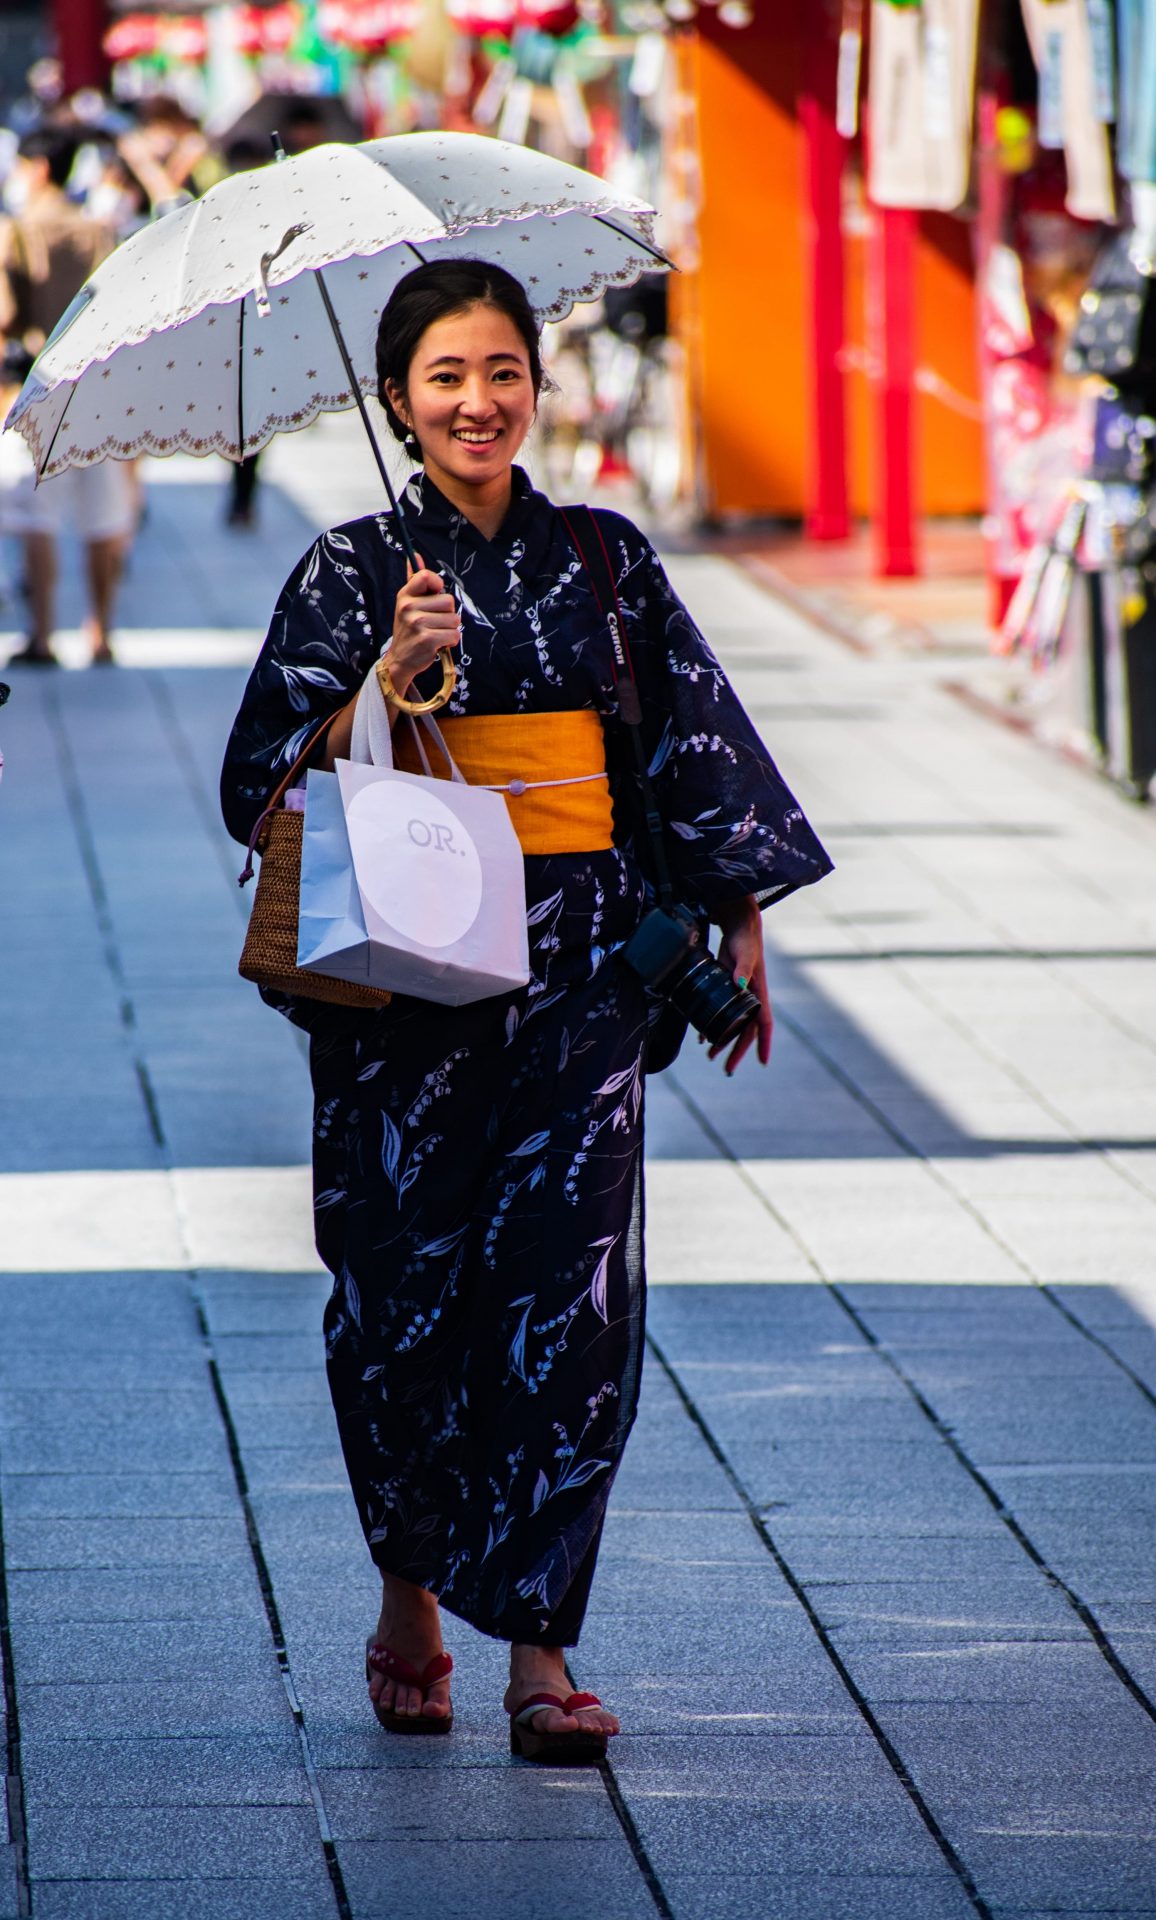 A lady wearing kimono made a pose for me while photographing